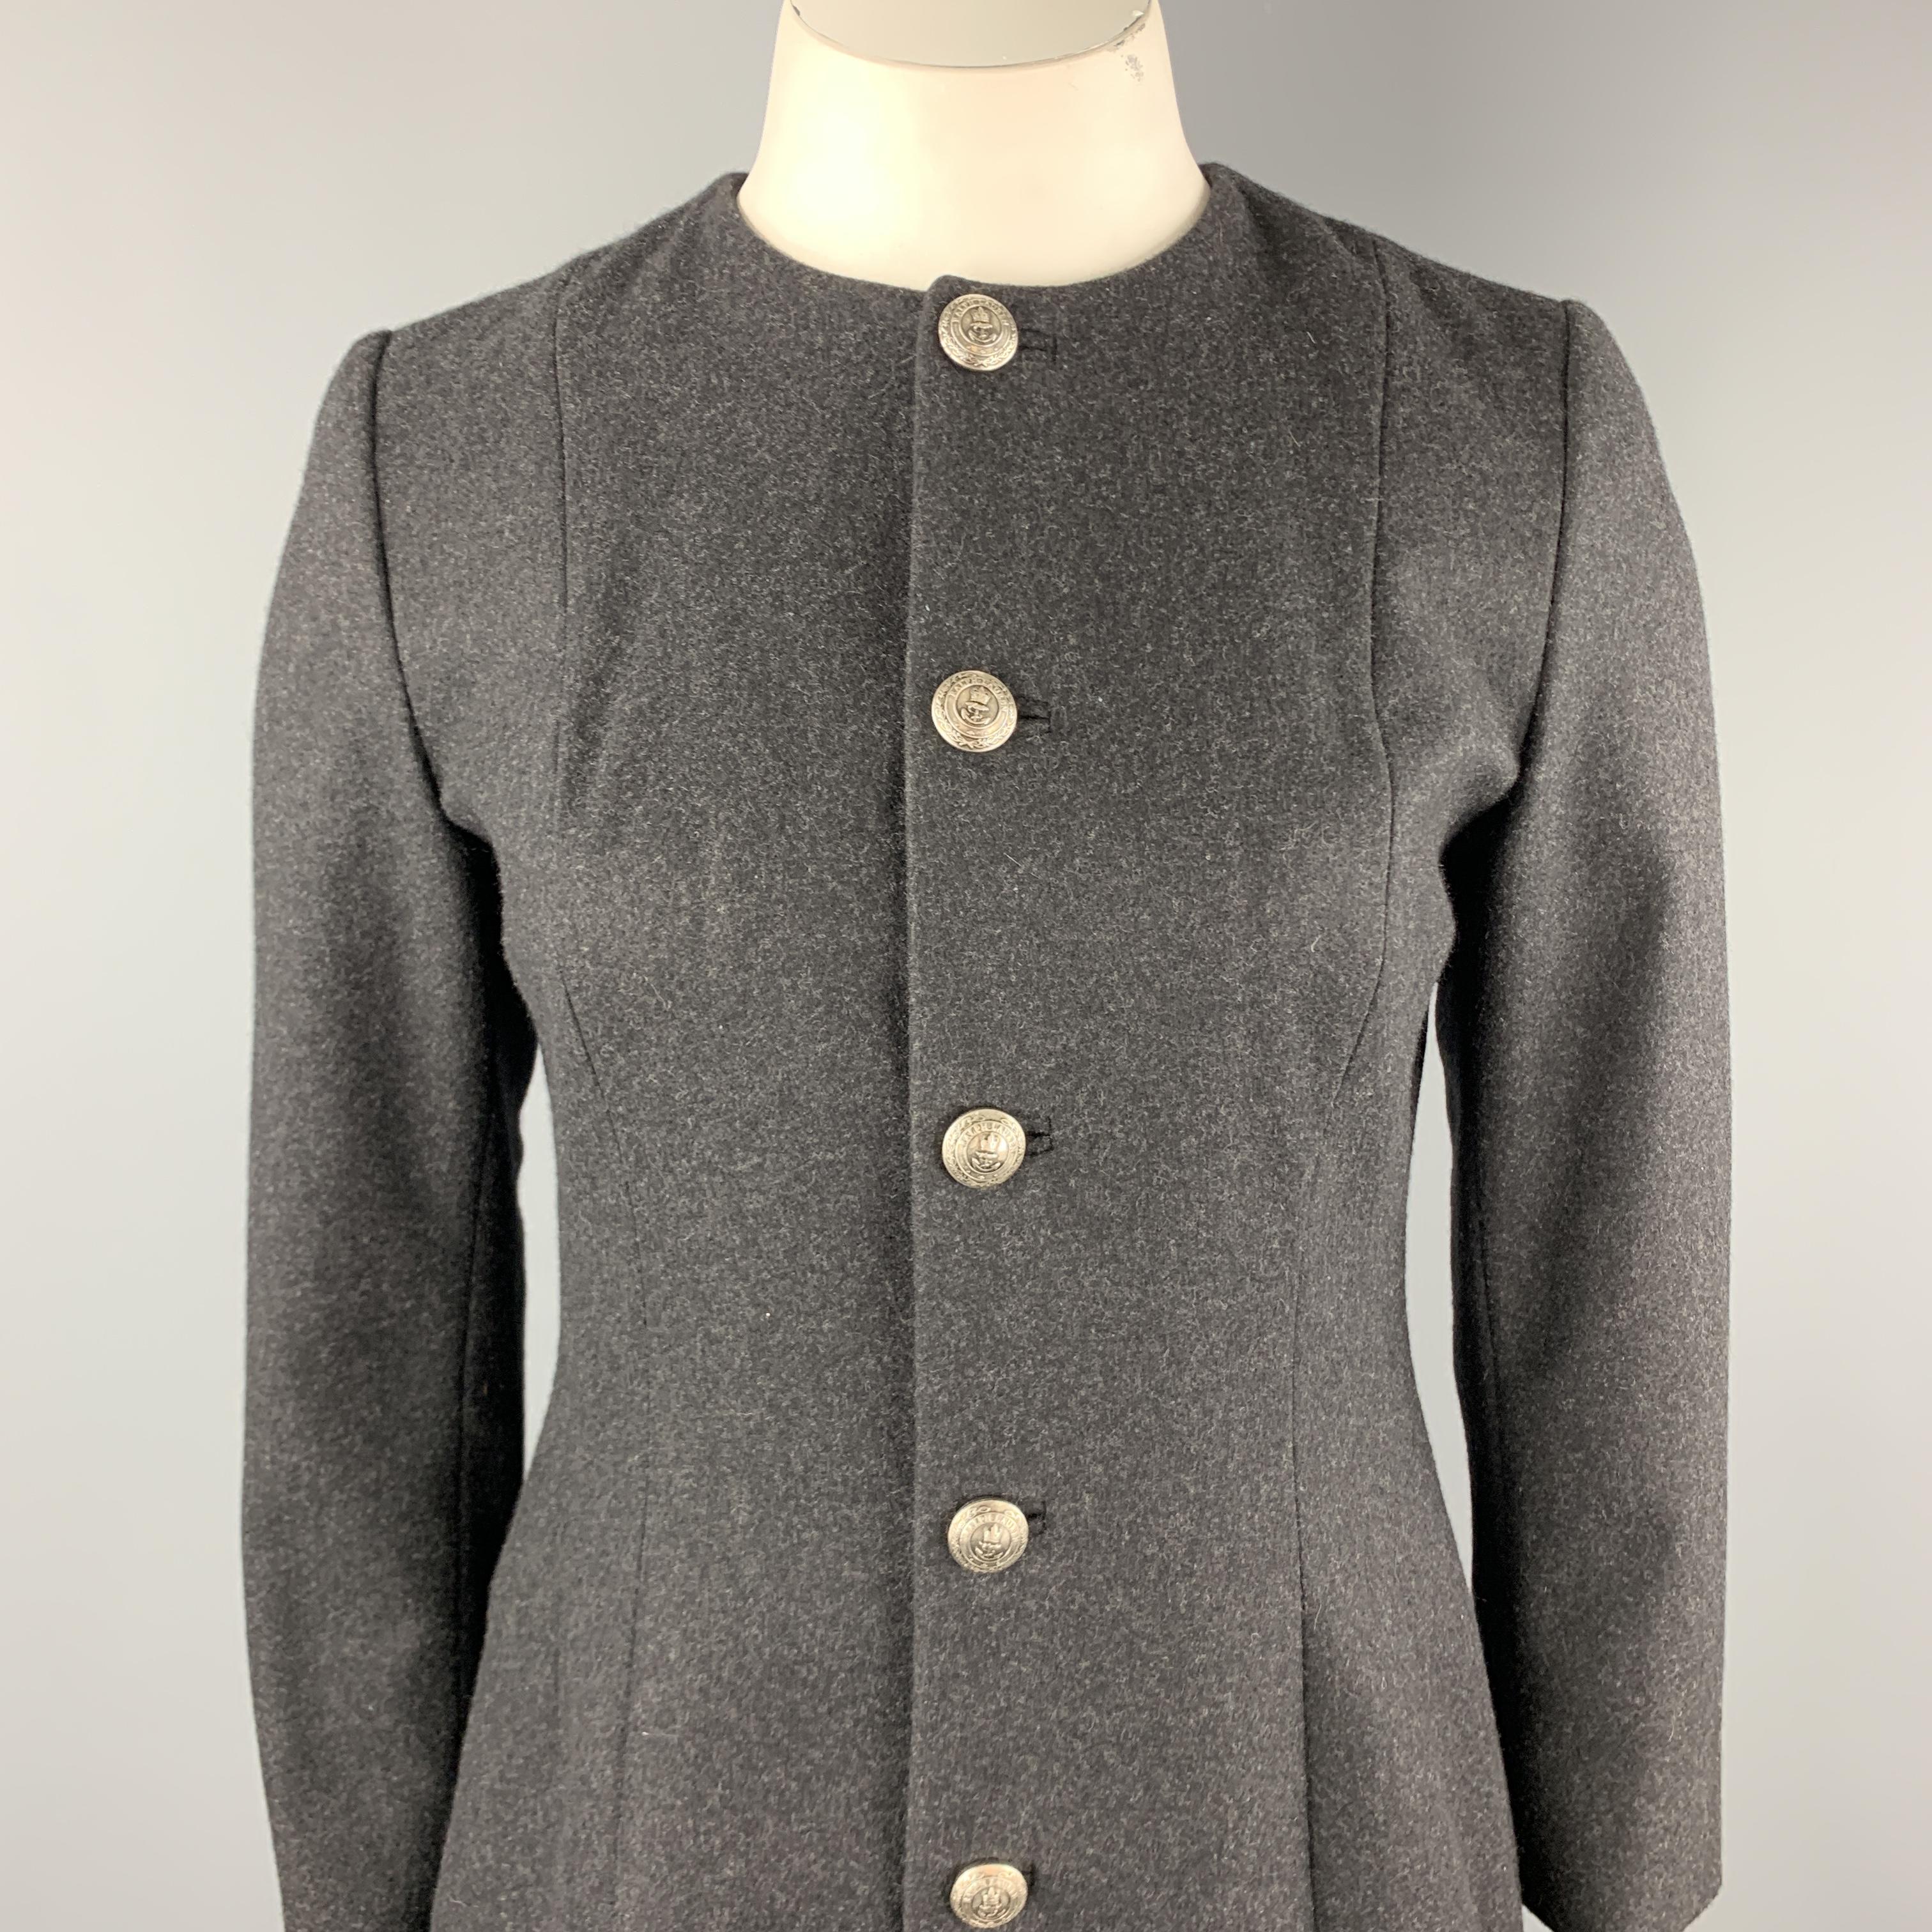 RALPH LAUREN BLACK LABEL coat comes in charcoal heathered gray merino wool blend with a round neckline, single breasted front with silver tone anchor buttons, and drop waist ruffle skirt hem line. Made in USA.

Excellent Pre-Owned Condition.
Marked: